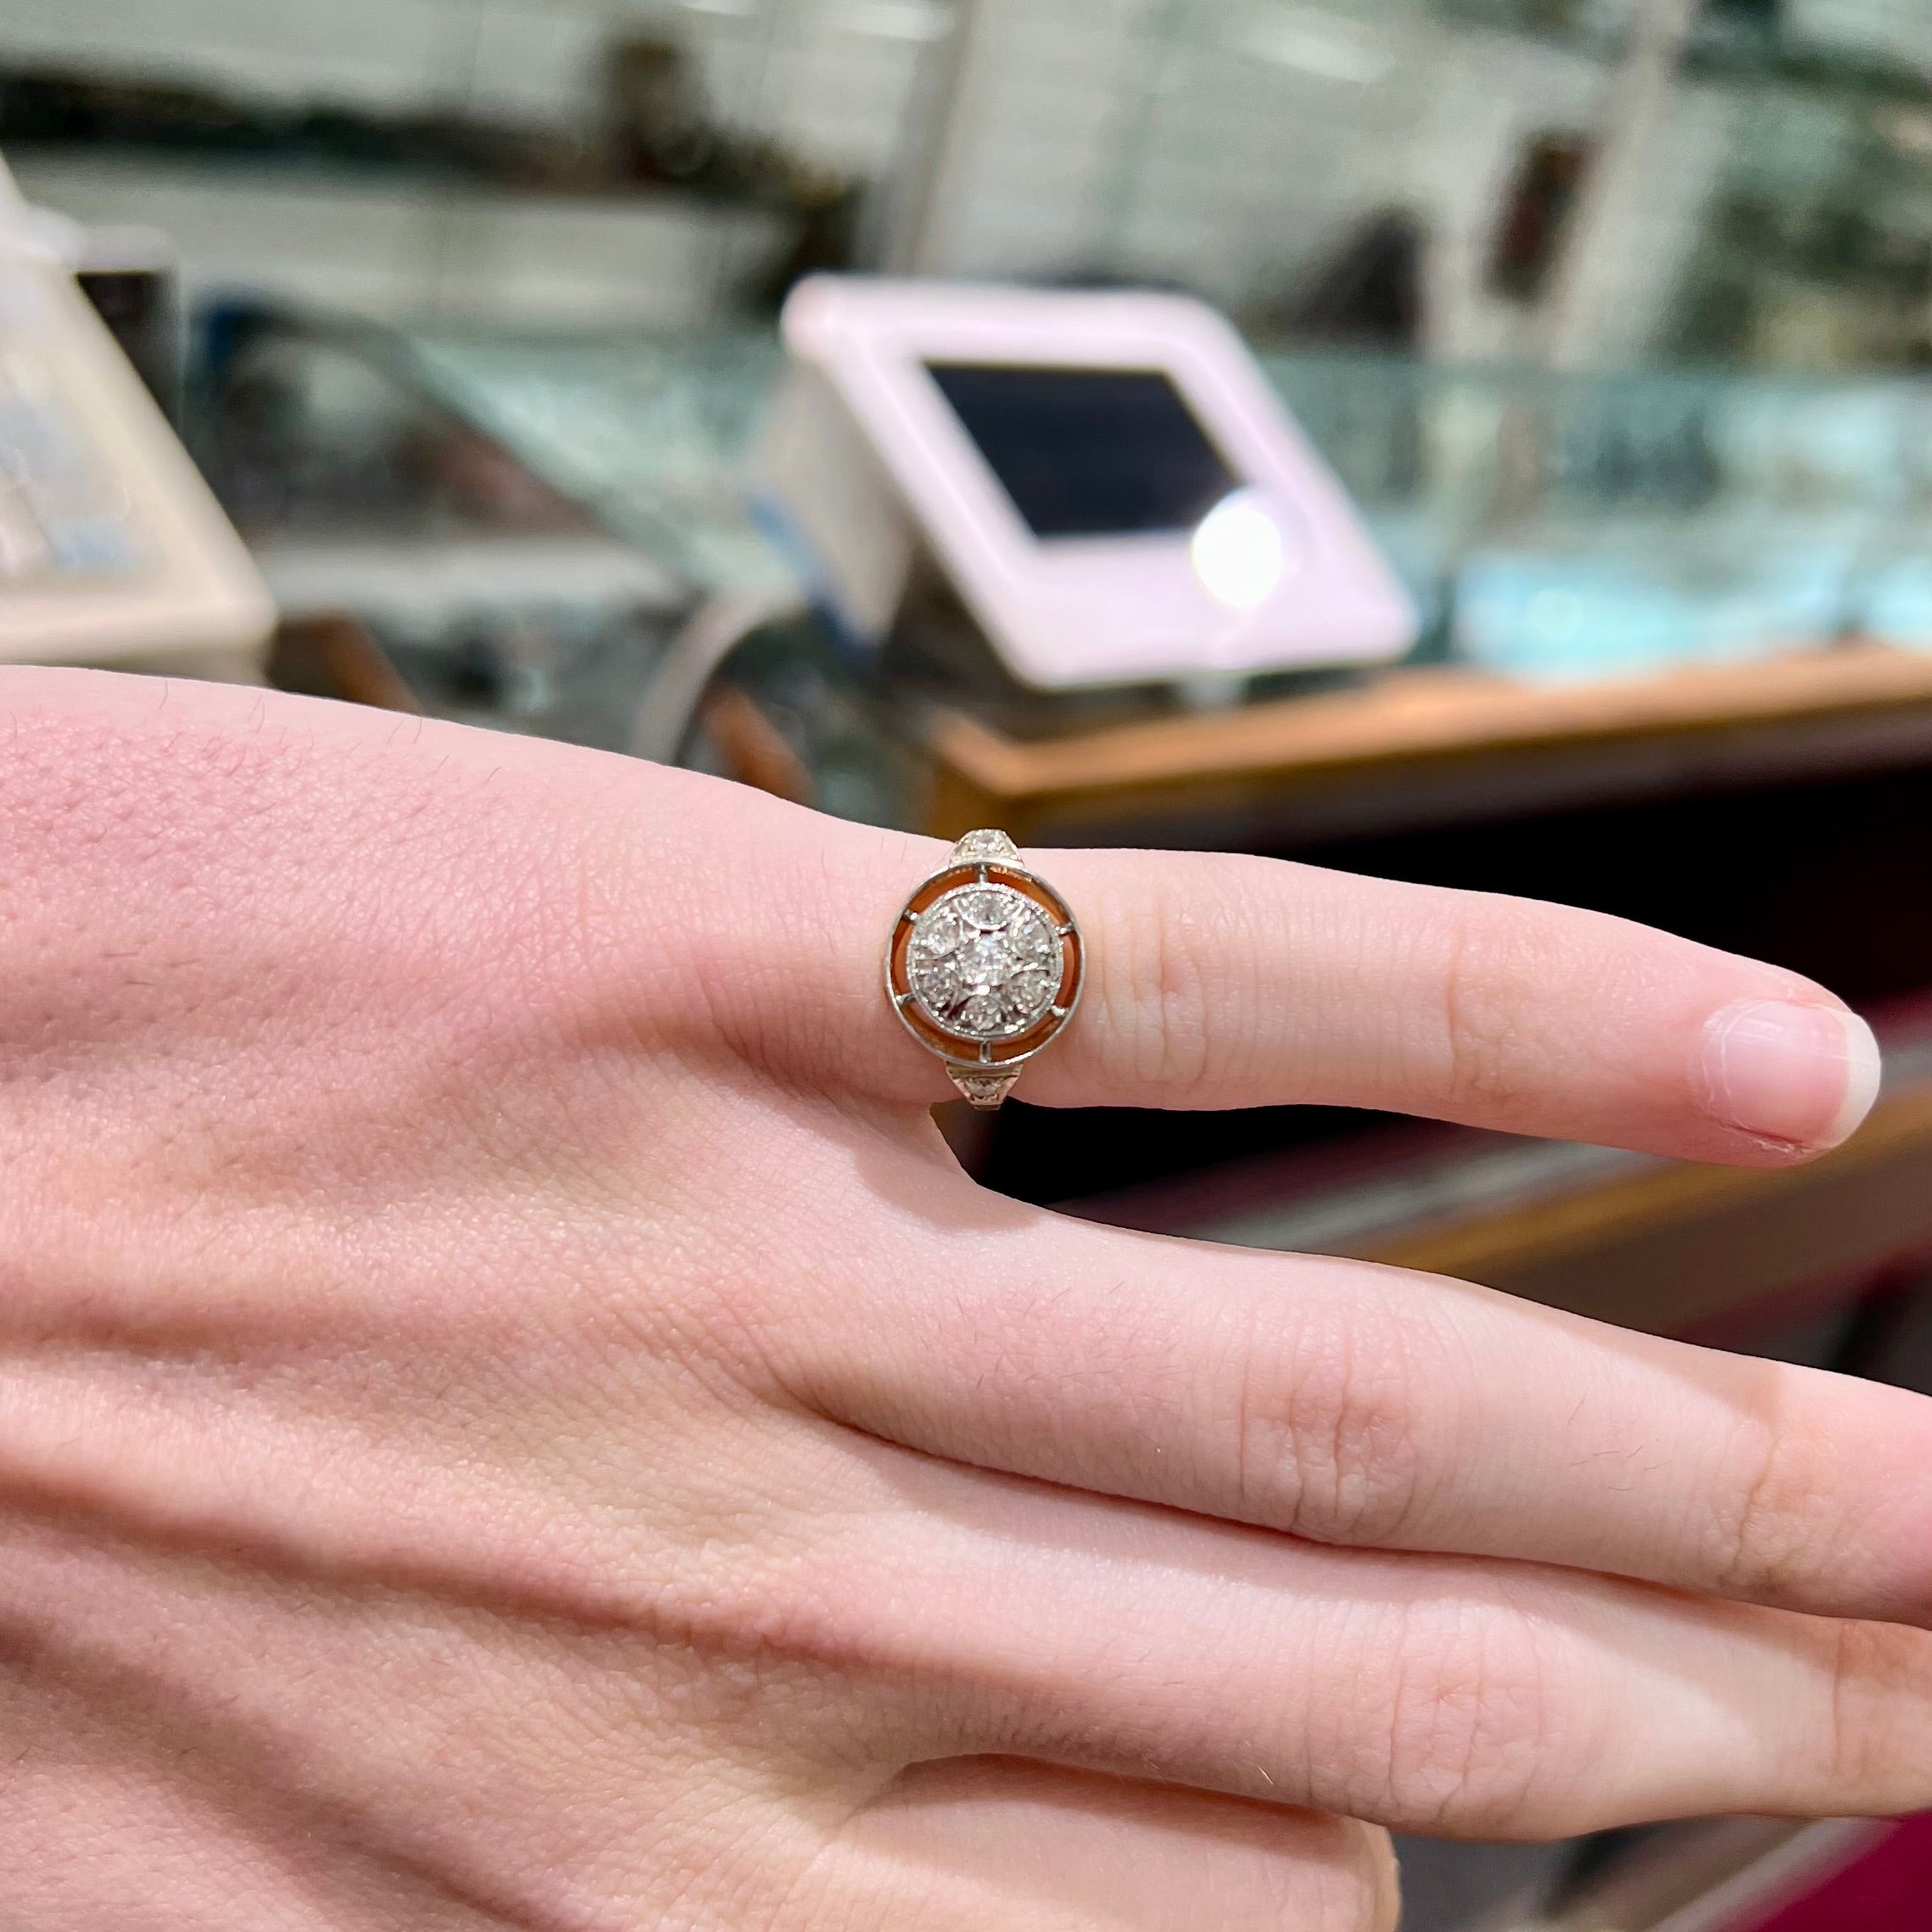 10 reasons to choose an antique engagement ring